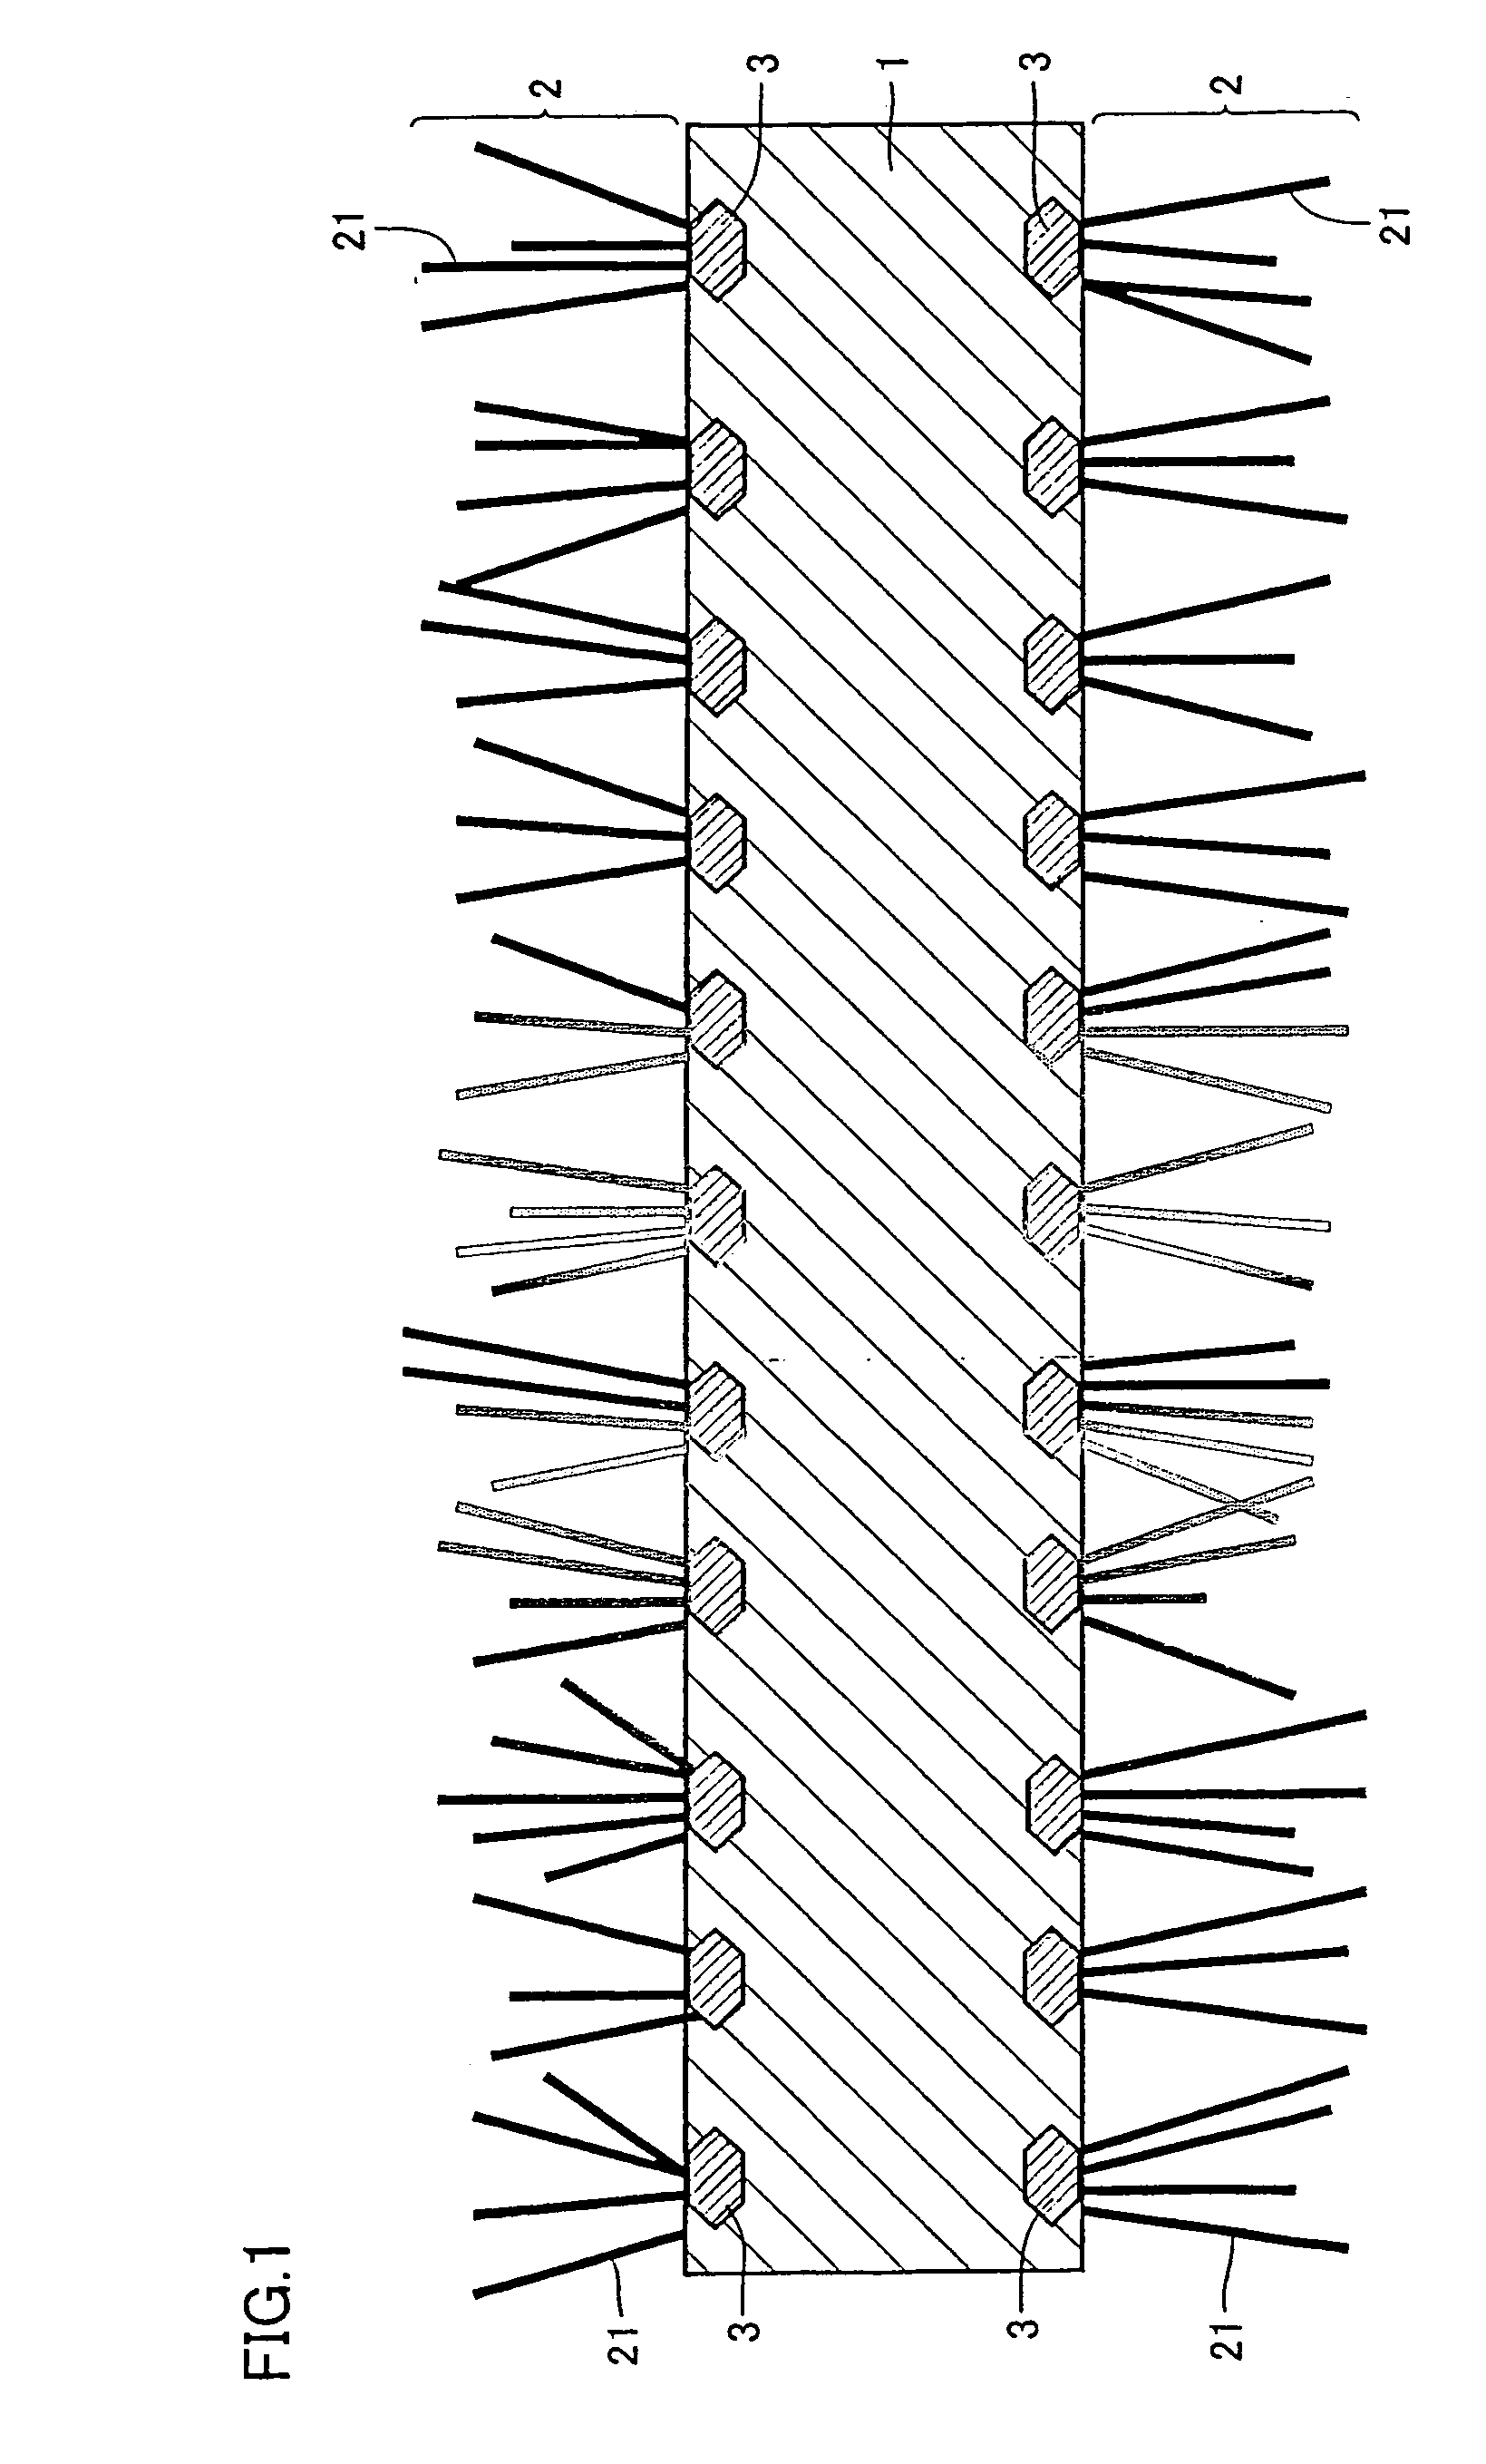 Carbon-coated aluminum and method for producing same